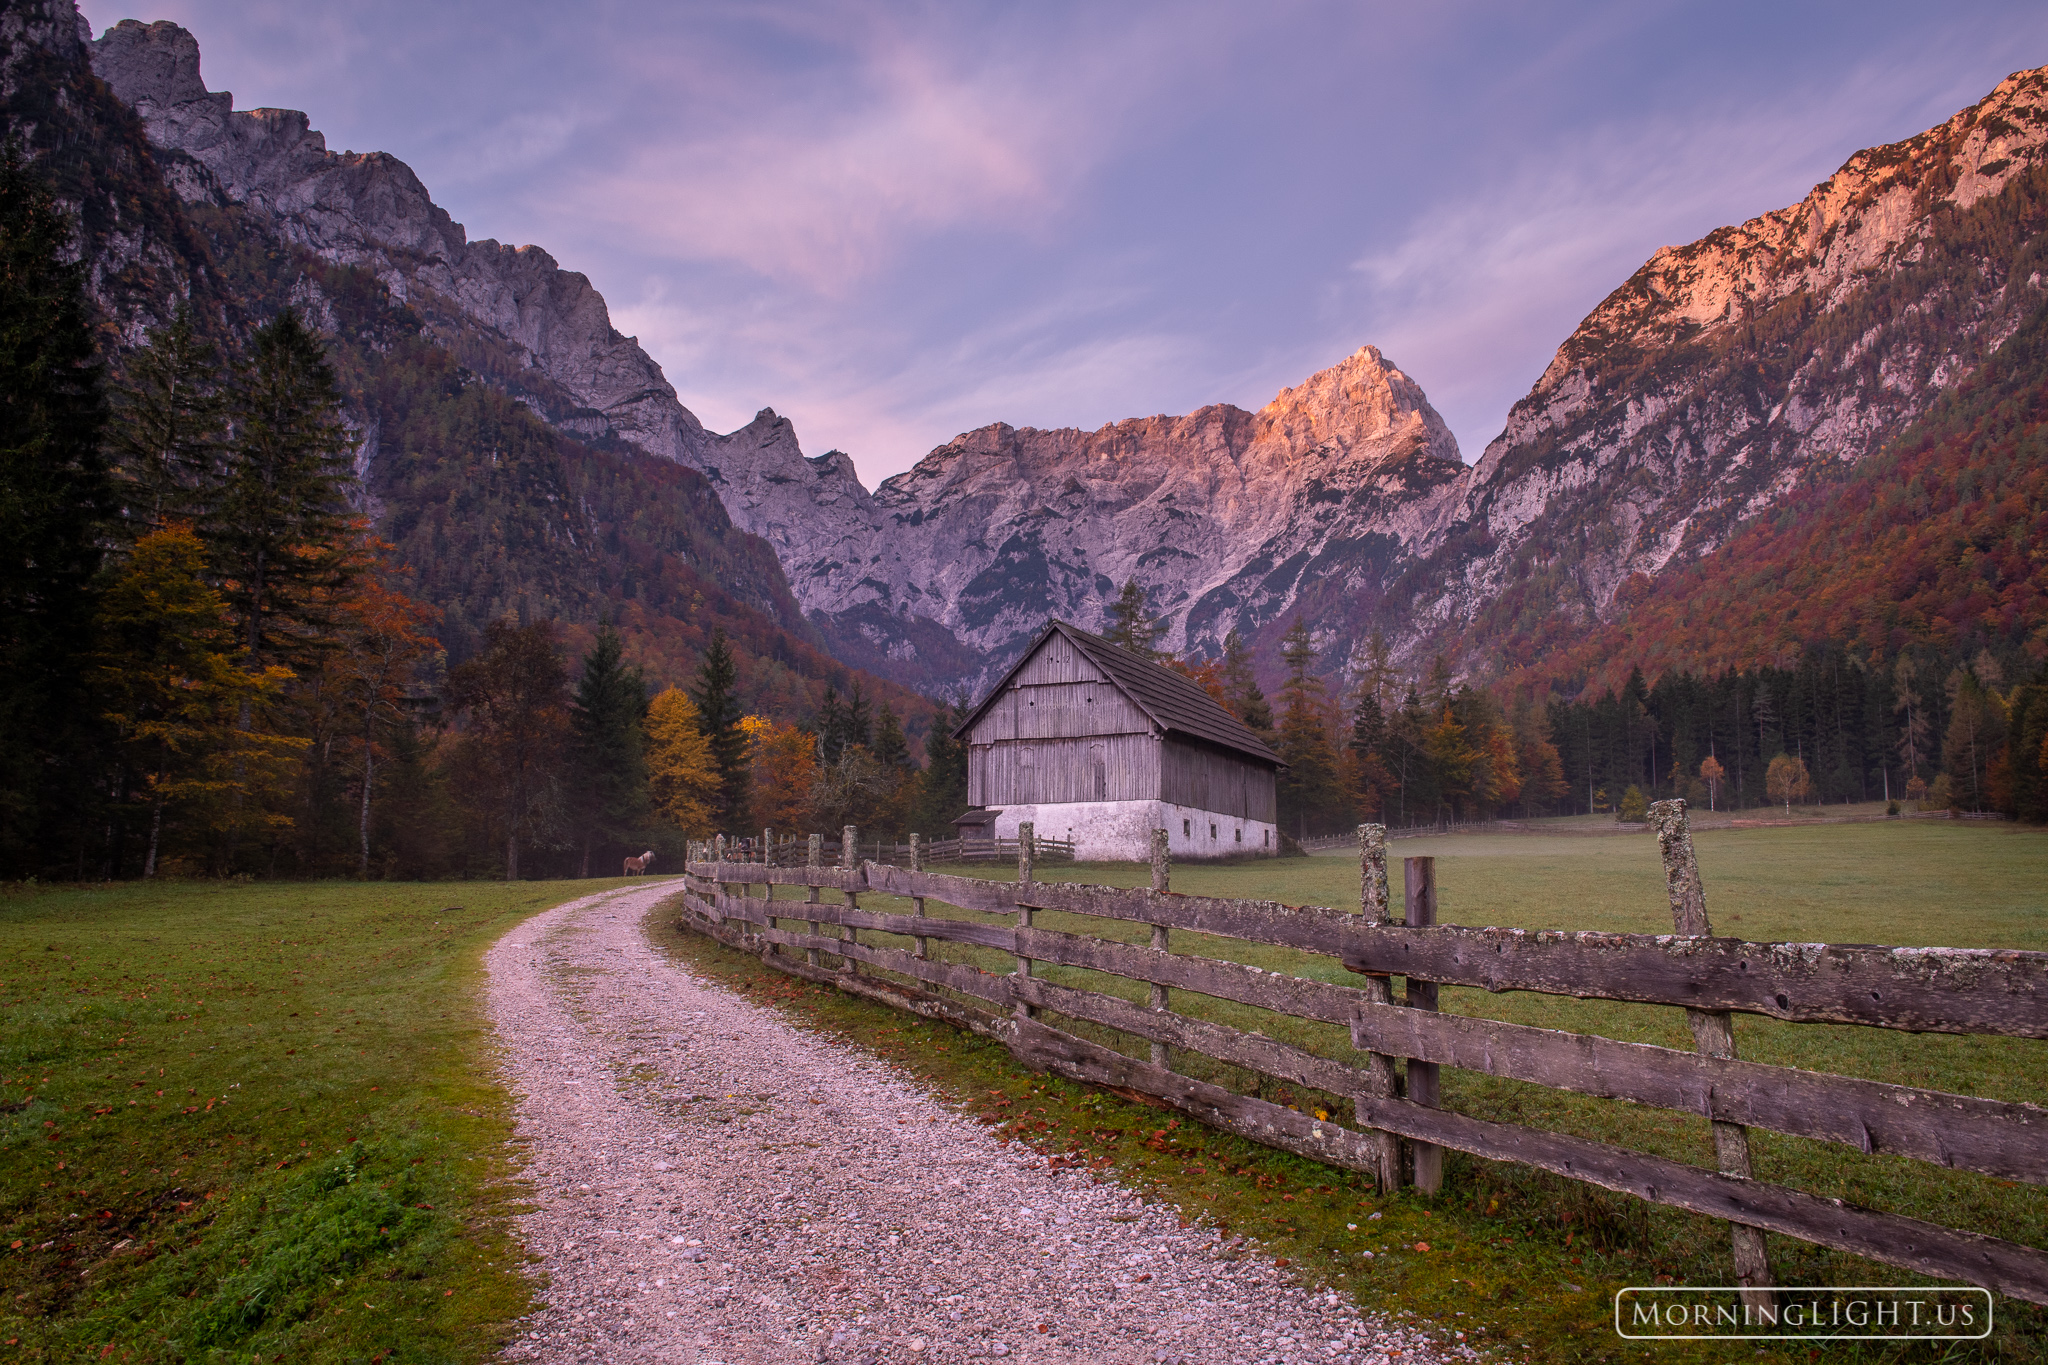 In the pre-dawn light this valley in the mounains of Slovenia glowed with a beautiful pink light. The horses began to wander...